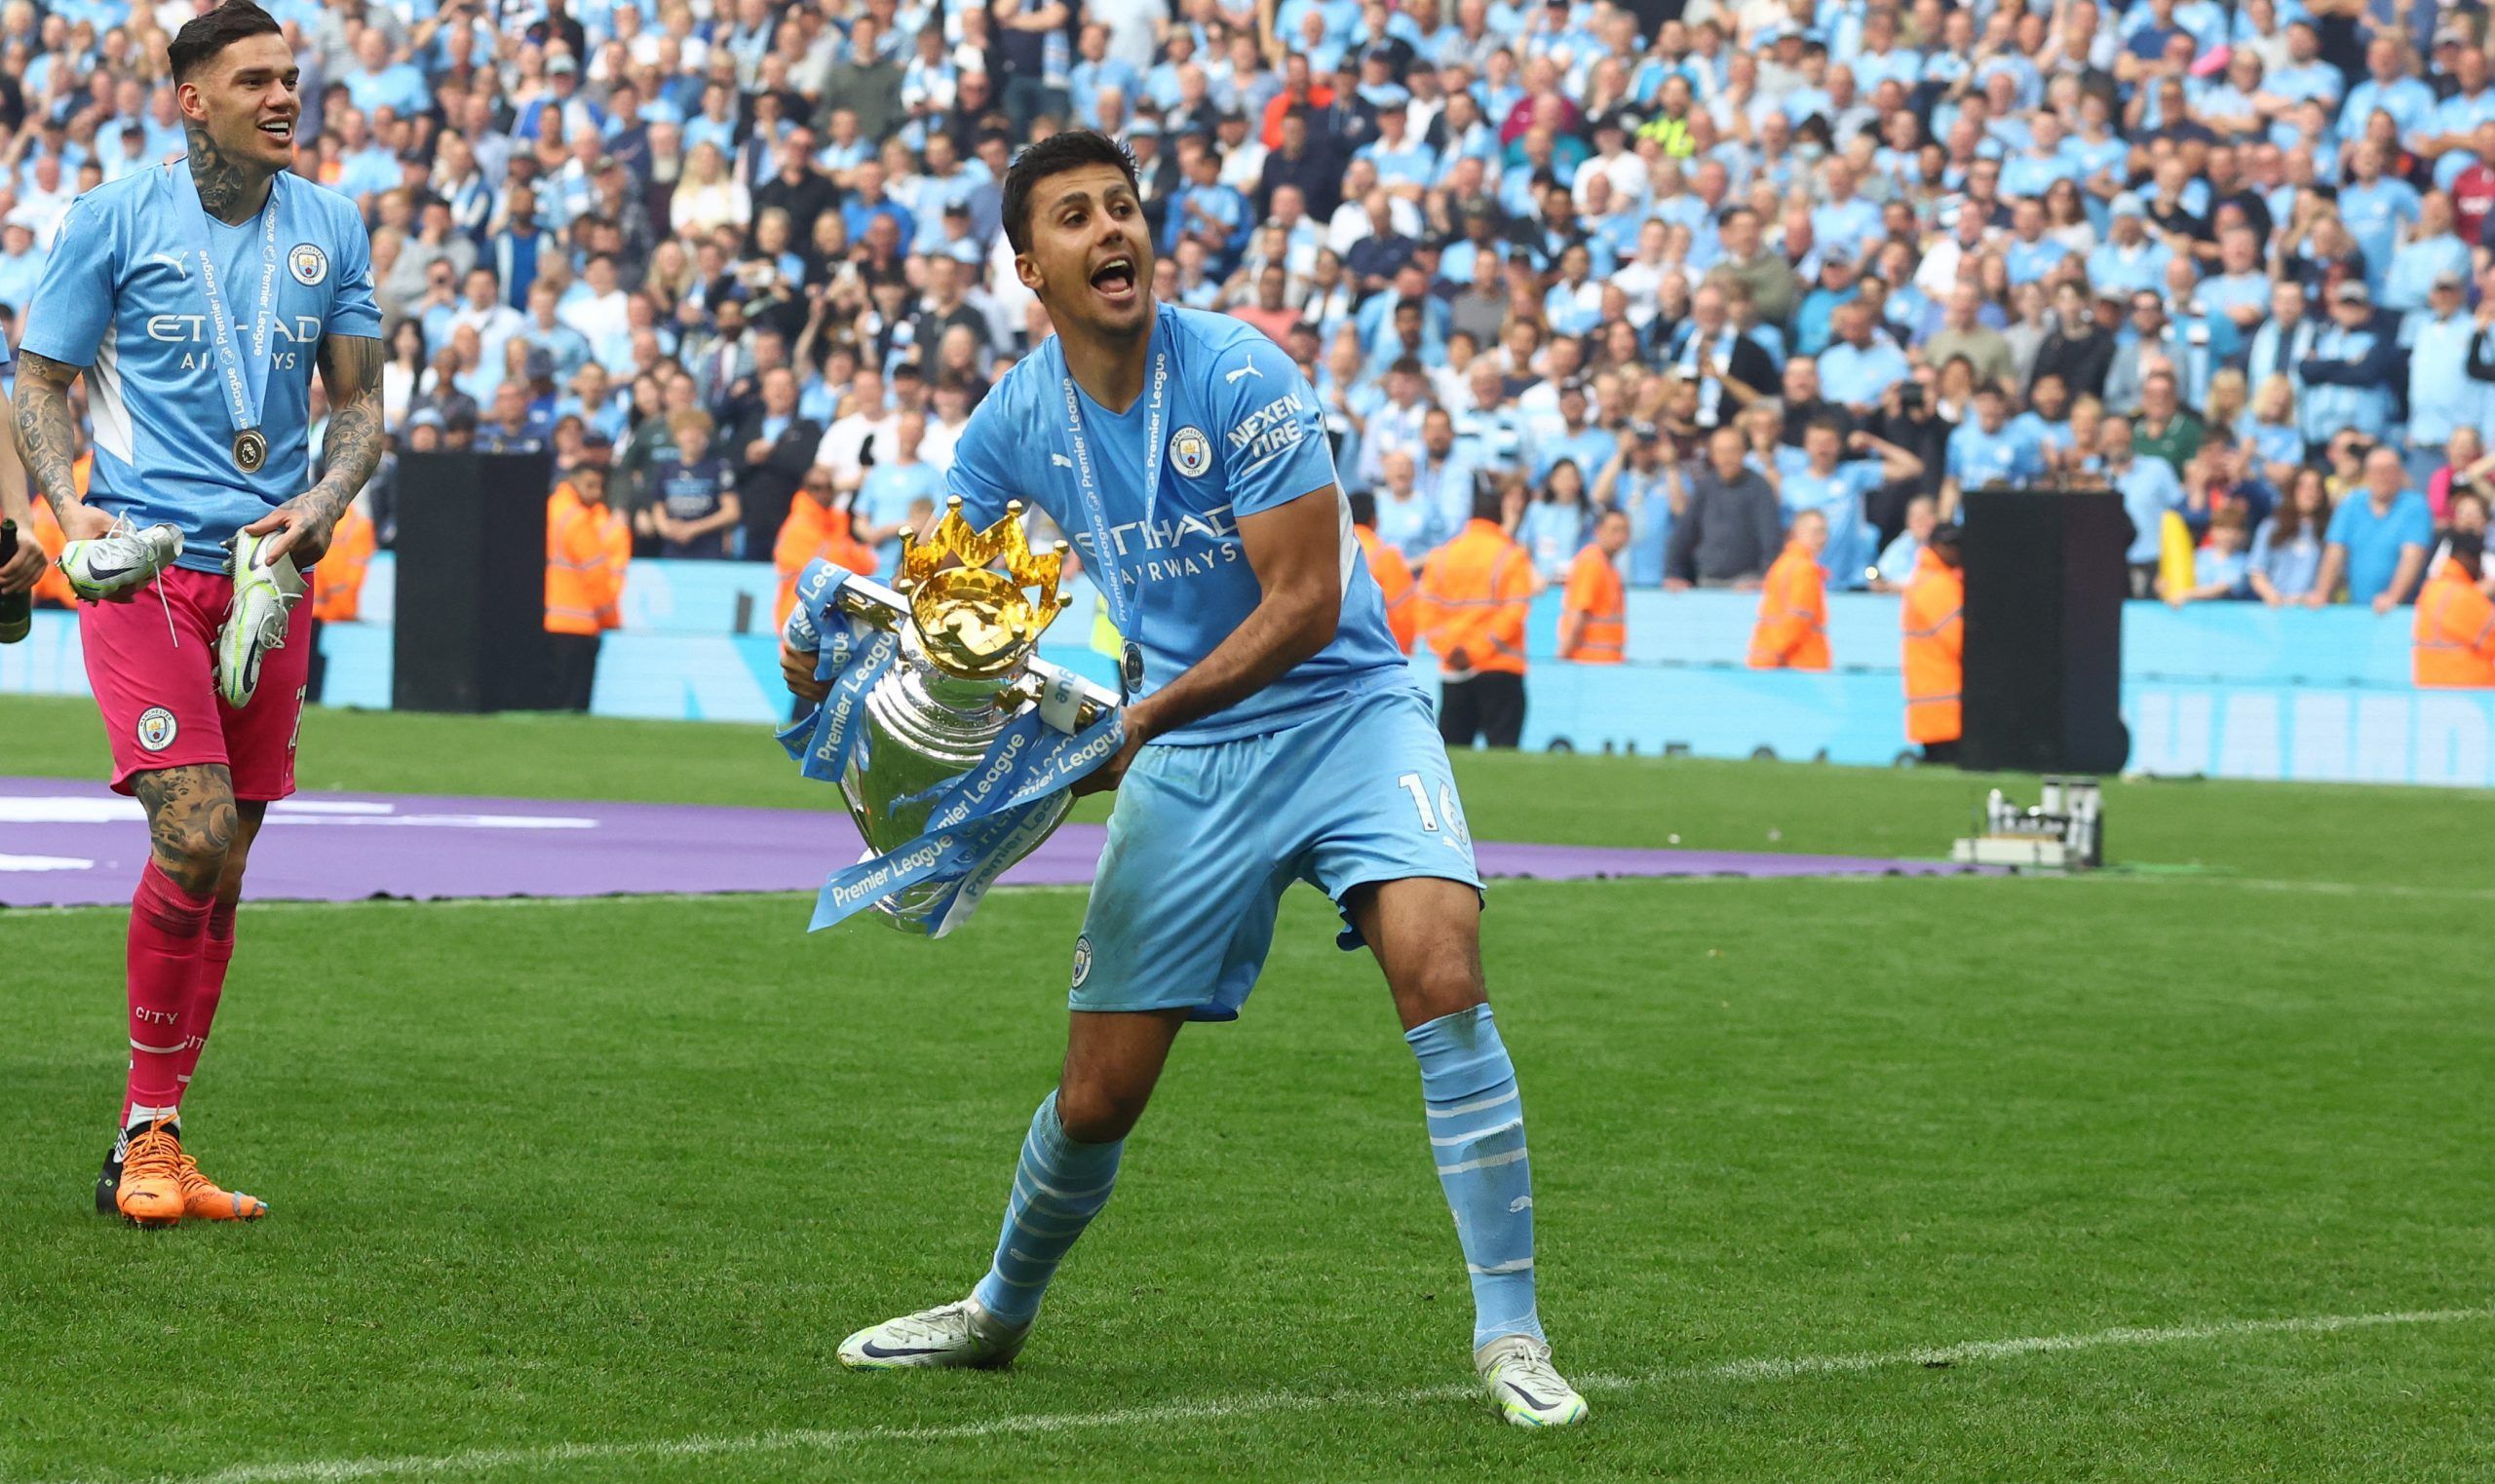 Soccer Football - Premier League - Manchester City v Aston Villa - Etihad Stadium, Manchester, Britain - May 22, 2022 Manchester City's Rodri celebrates with the trophy after winning the Premier League REUTERS/Hannah Mckay EDITORIAL USE ONLY. No use with unauthorized audio, video, data, fixture lists, club/league logos or 'live' services. Online in-match use limited to 75 images, no video emulation. No use in betting, games or single club /league/player publications.  Please contact your account